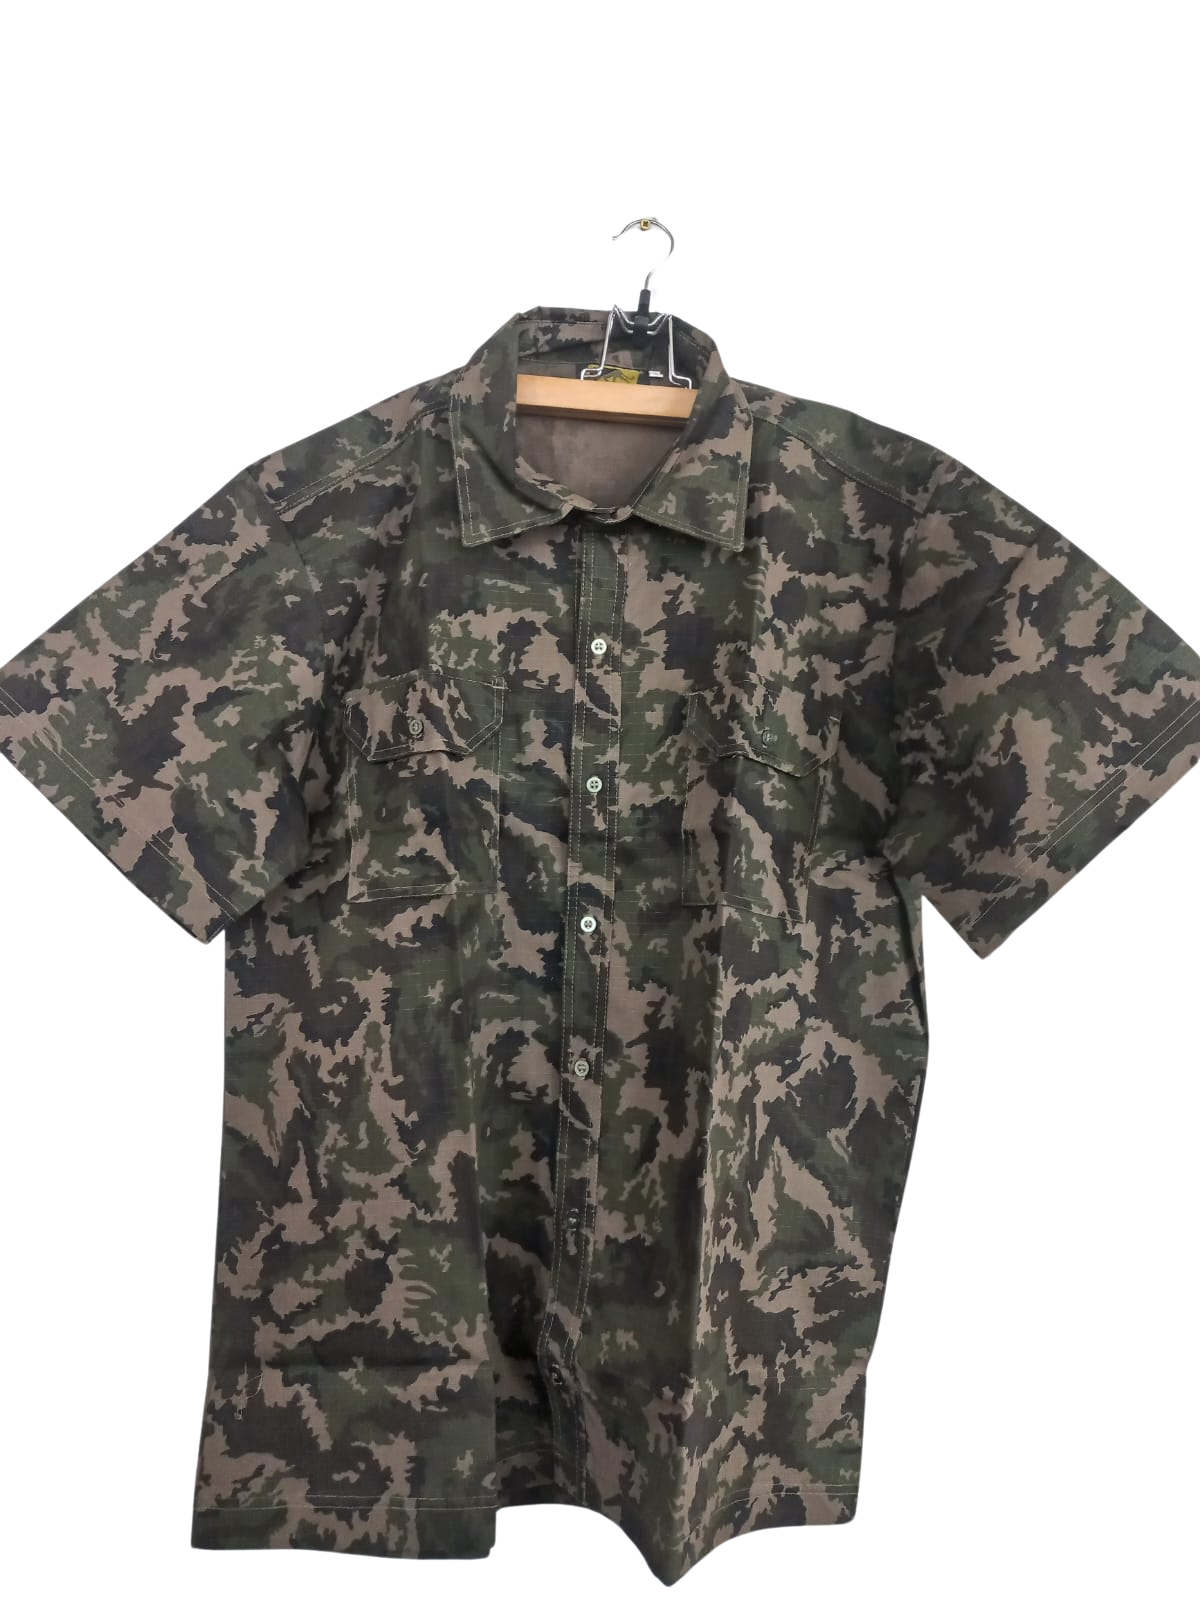 Men's Outdoor Camo Shirt: Durable, Breathable, and Versatile Apparel for Hunting, Camping, Hiking, and More!